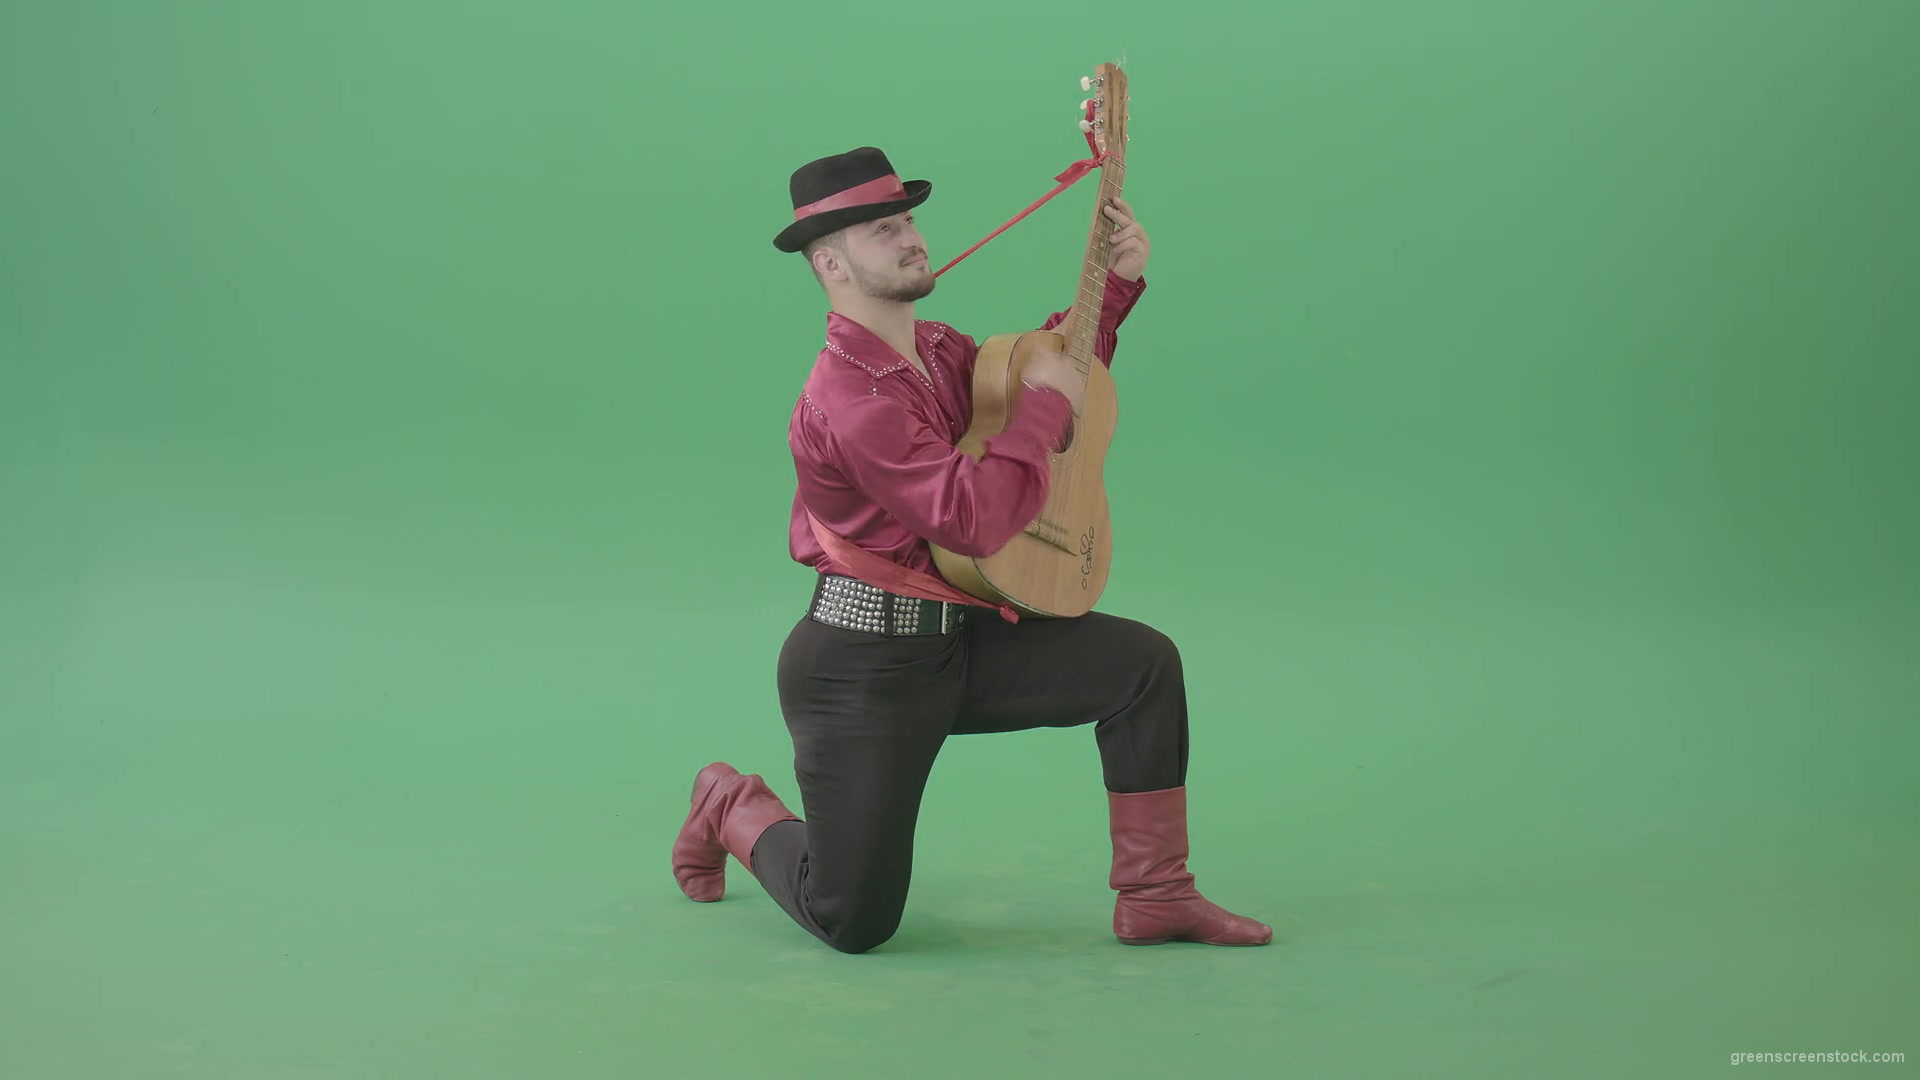 Man-in-Gipsy-costume-playing-love-song-on-guitar-isolated-on-green-screen-4K-Video-Footage-1920_007 Green Screen Stock